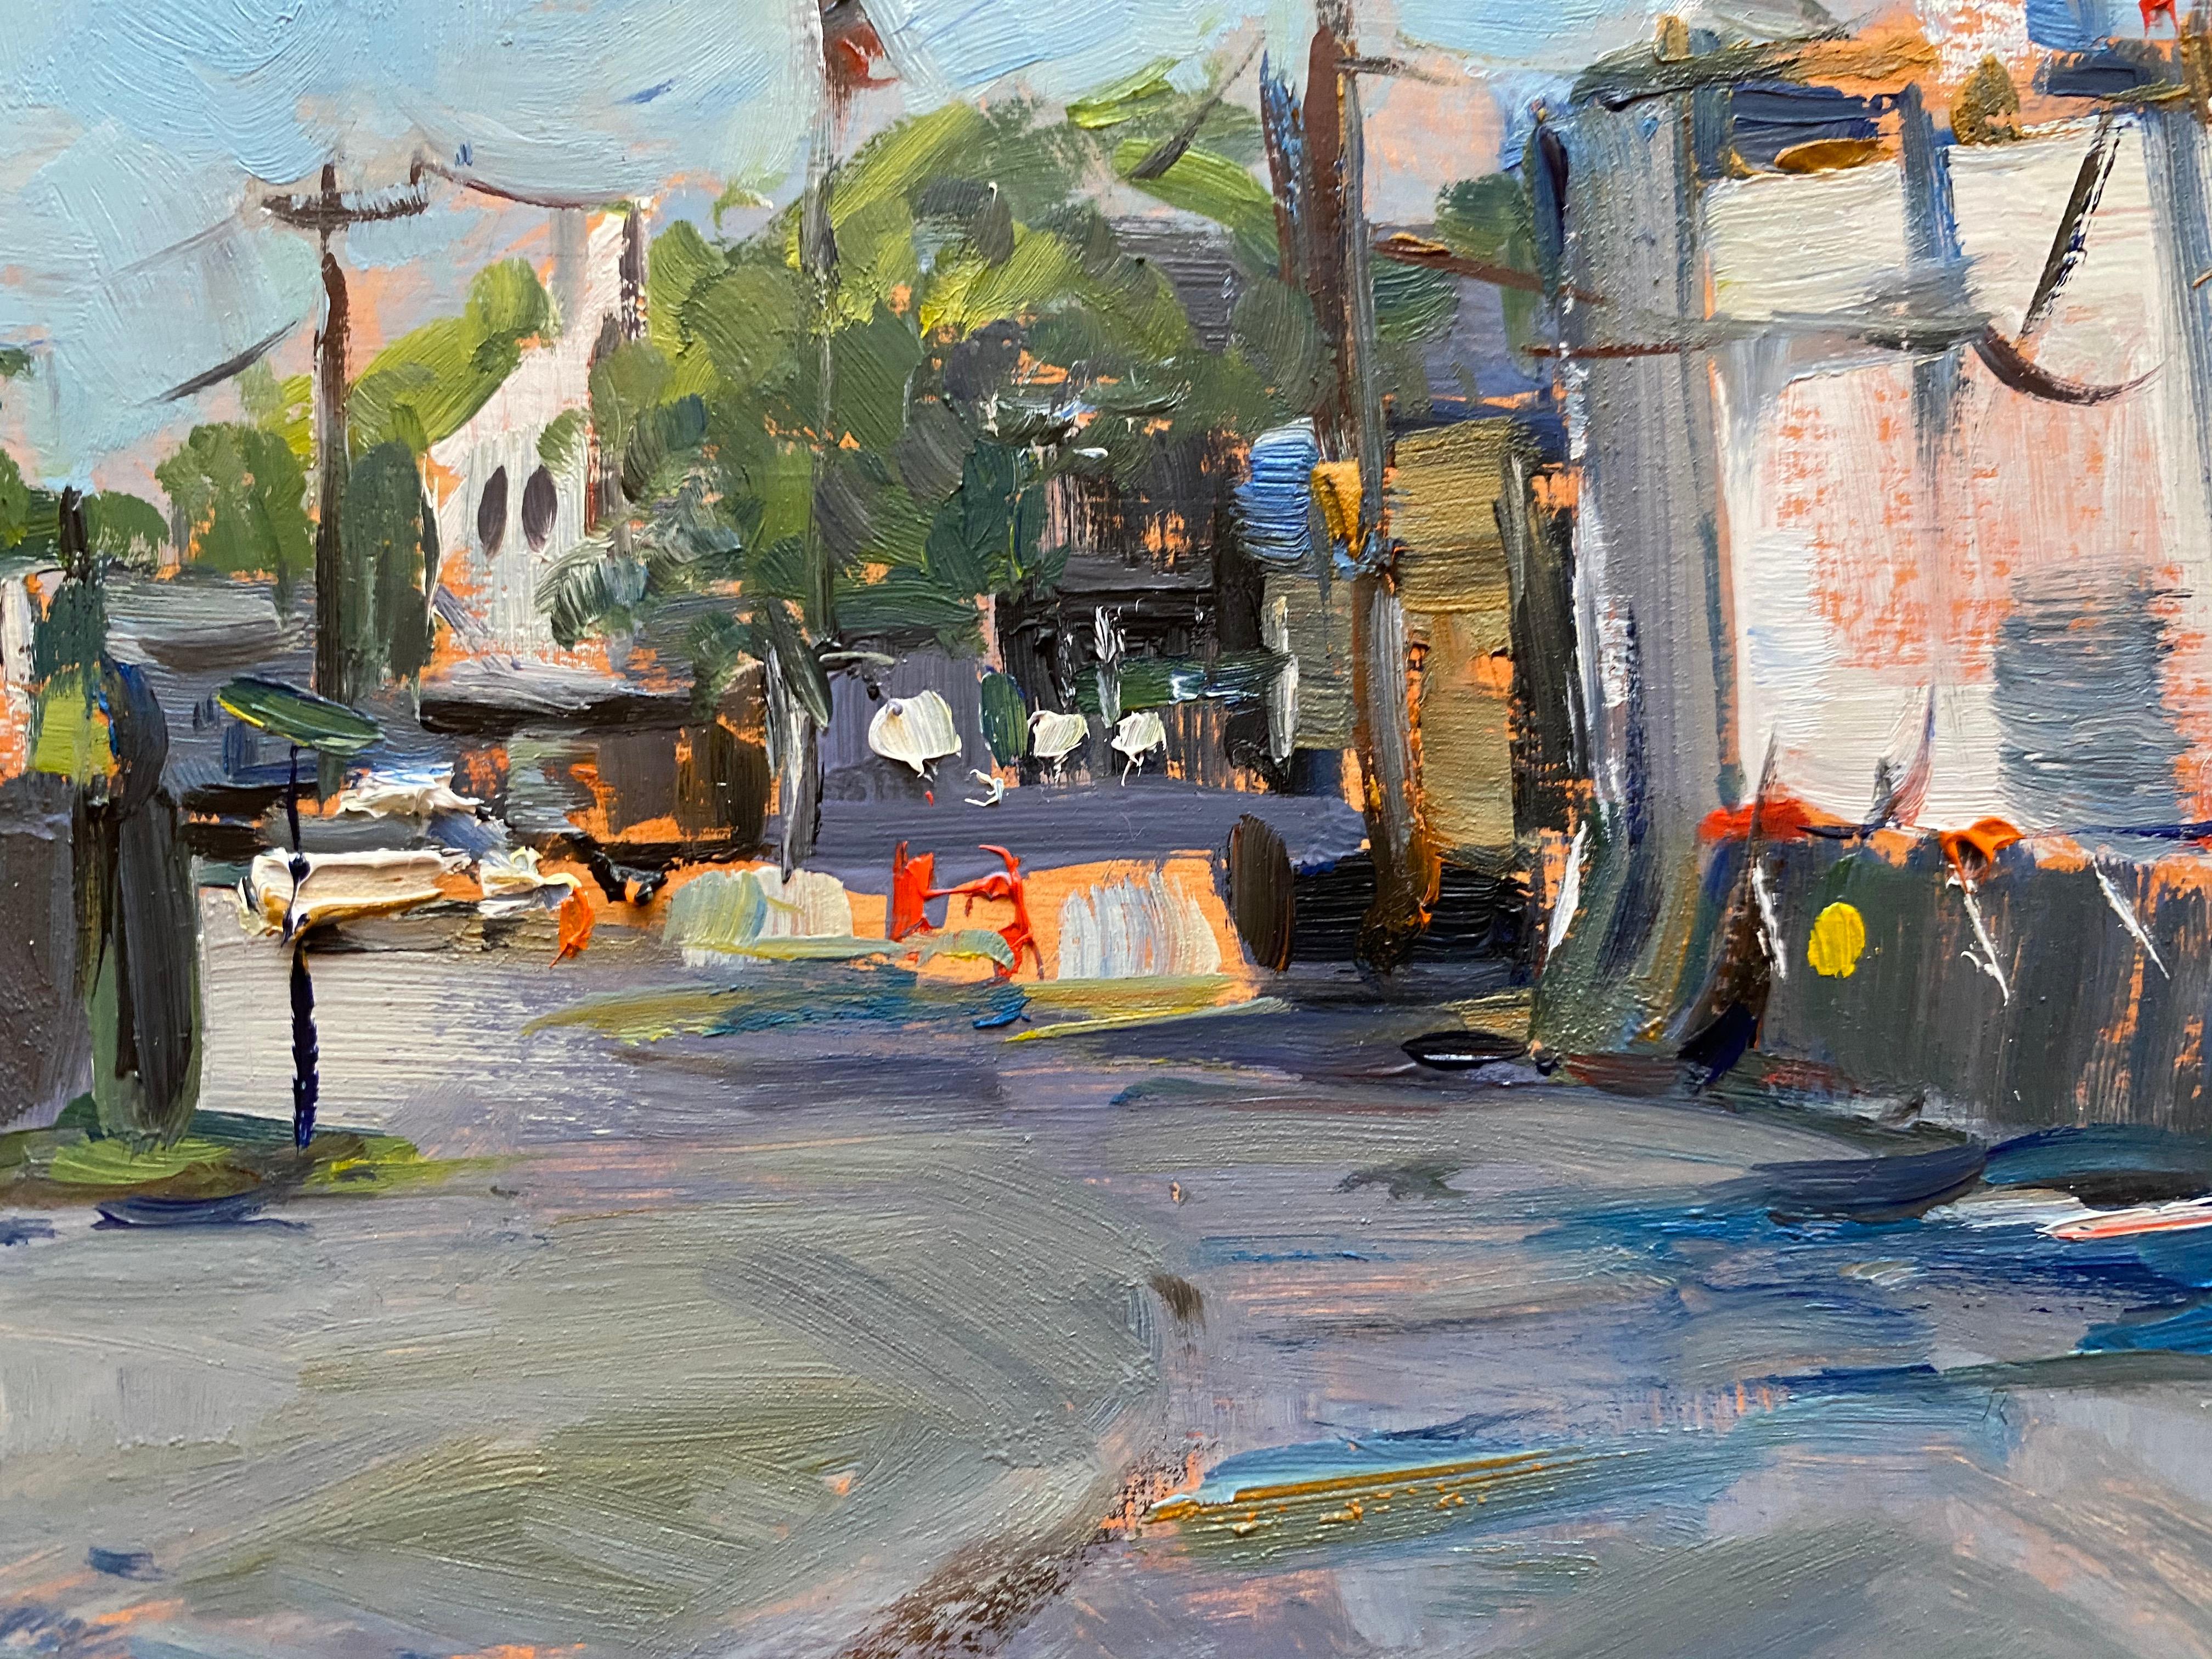 Sag Harbor Cinema Under Construction - Gray Landscape Painting by Tina Orsolic Dalessio